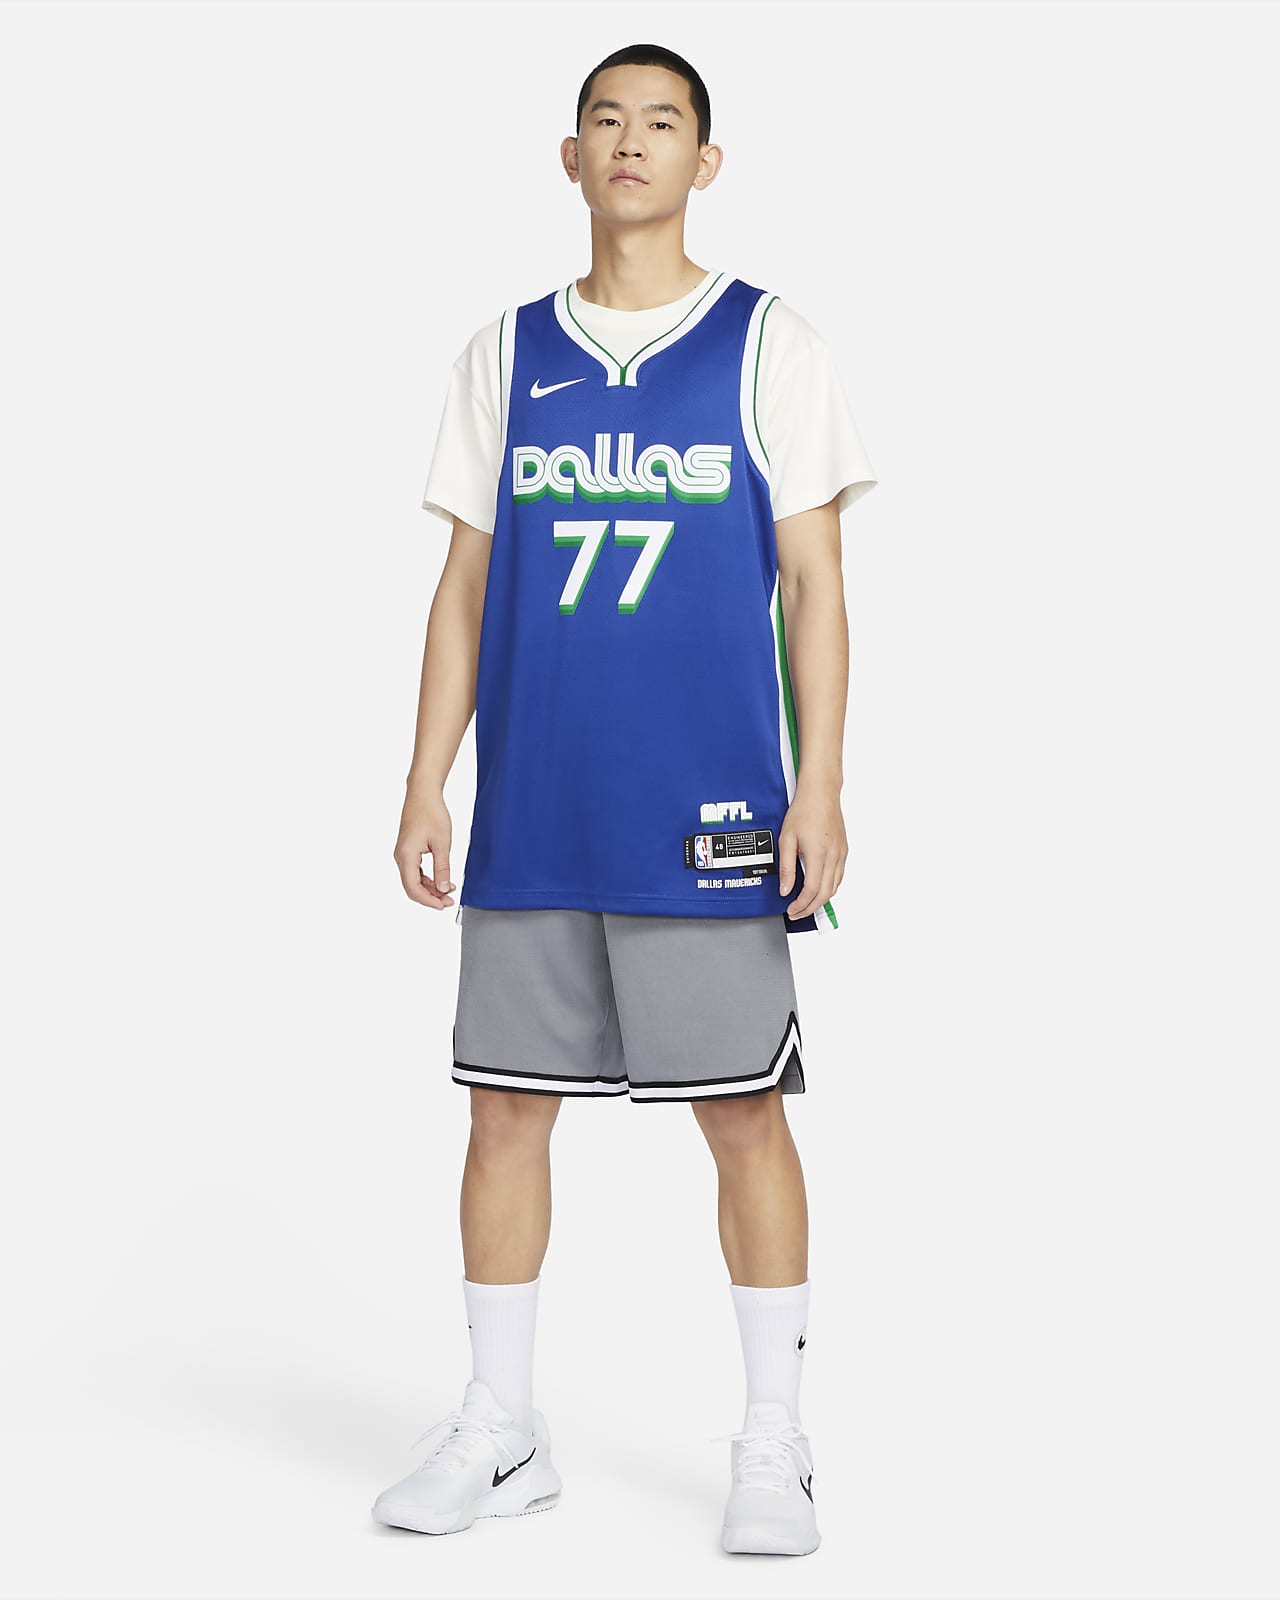 luka doncic jersey womens